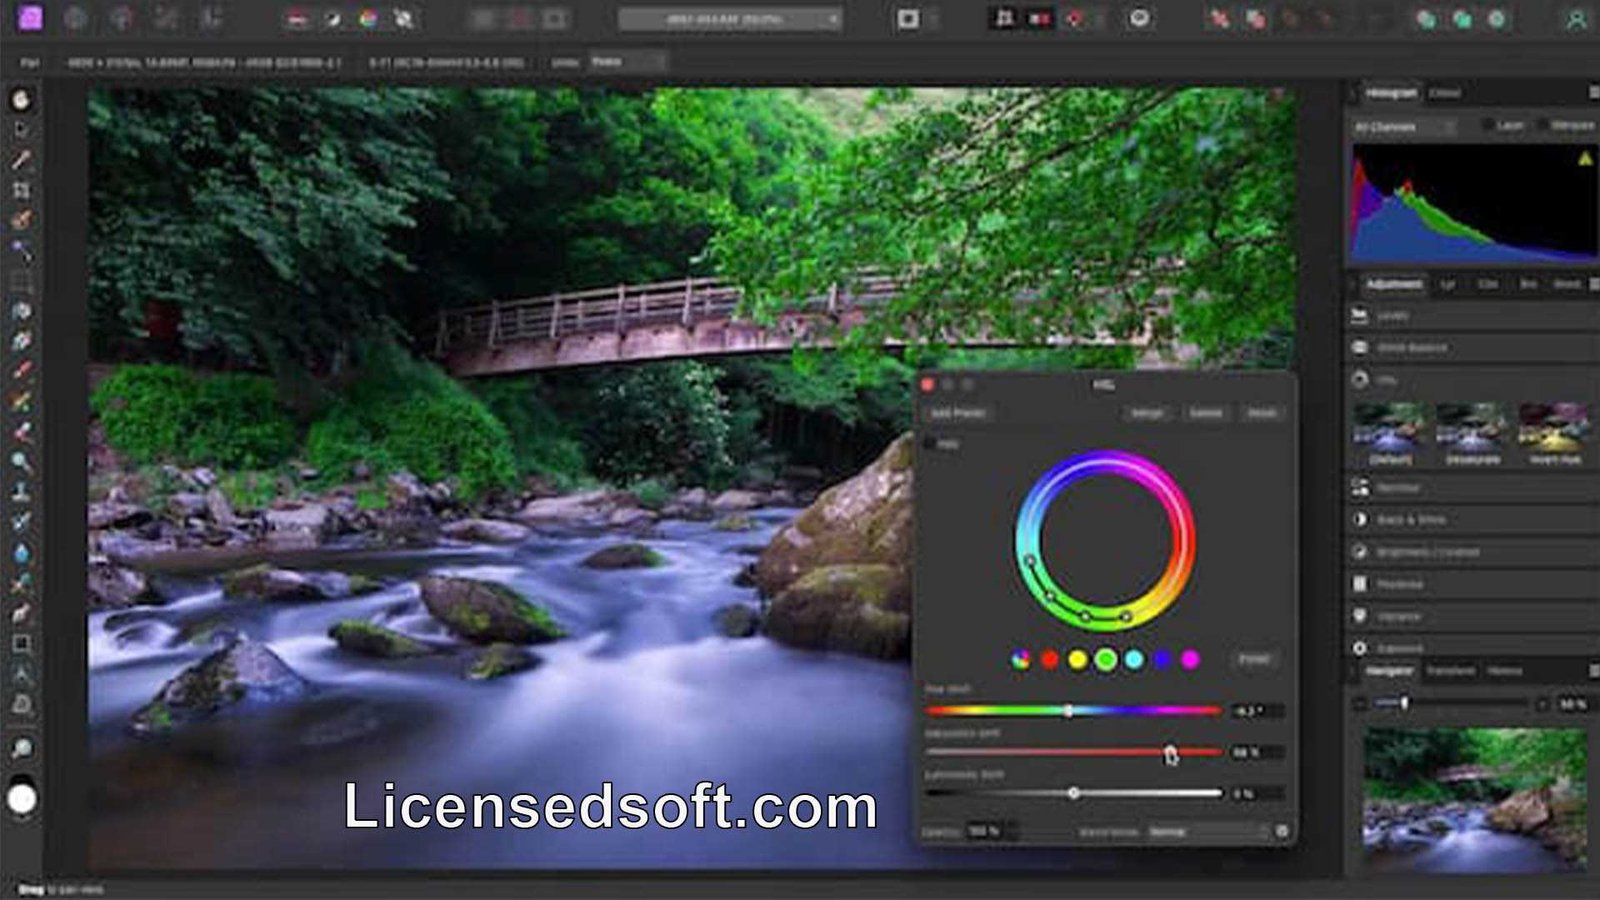 Affinity Photo 2.3.1 For mac Lifetime Premium cover photo by licensedsoft